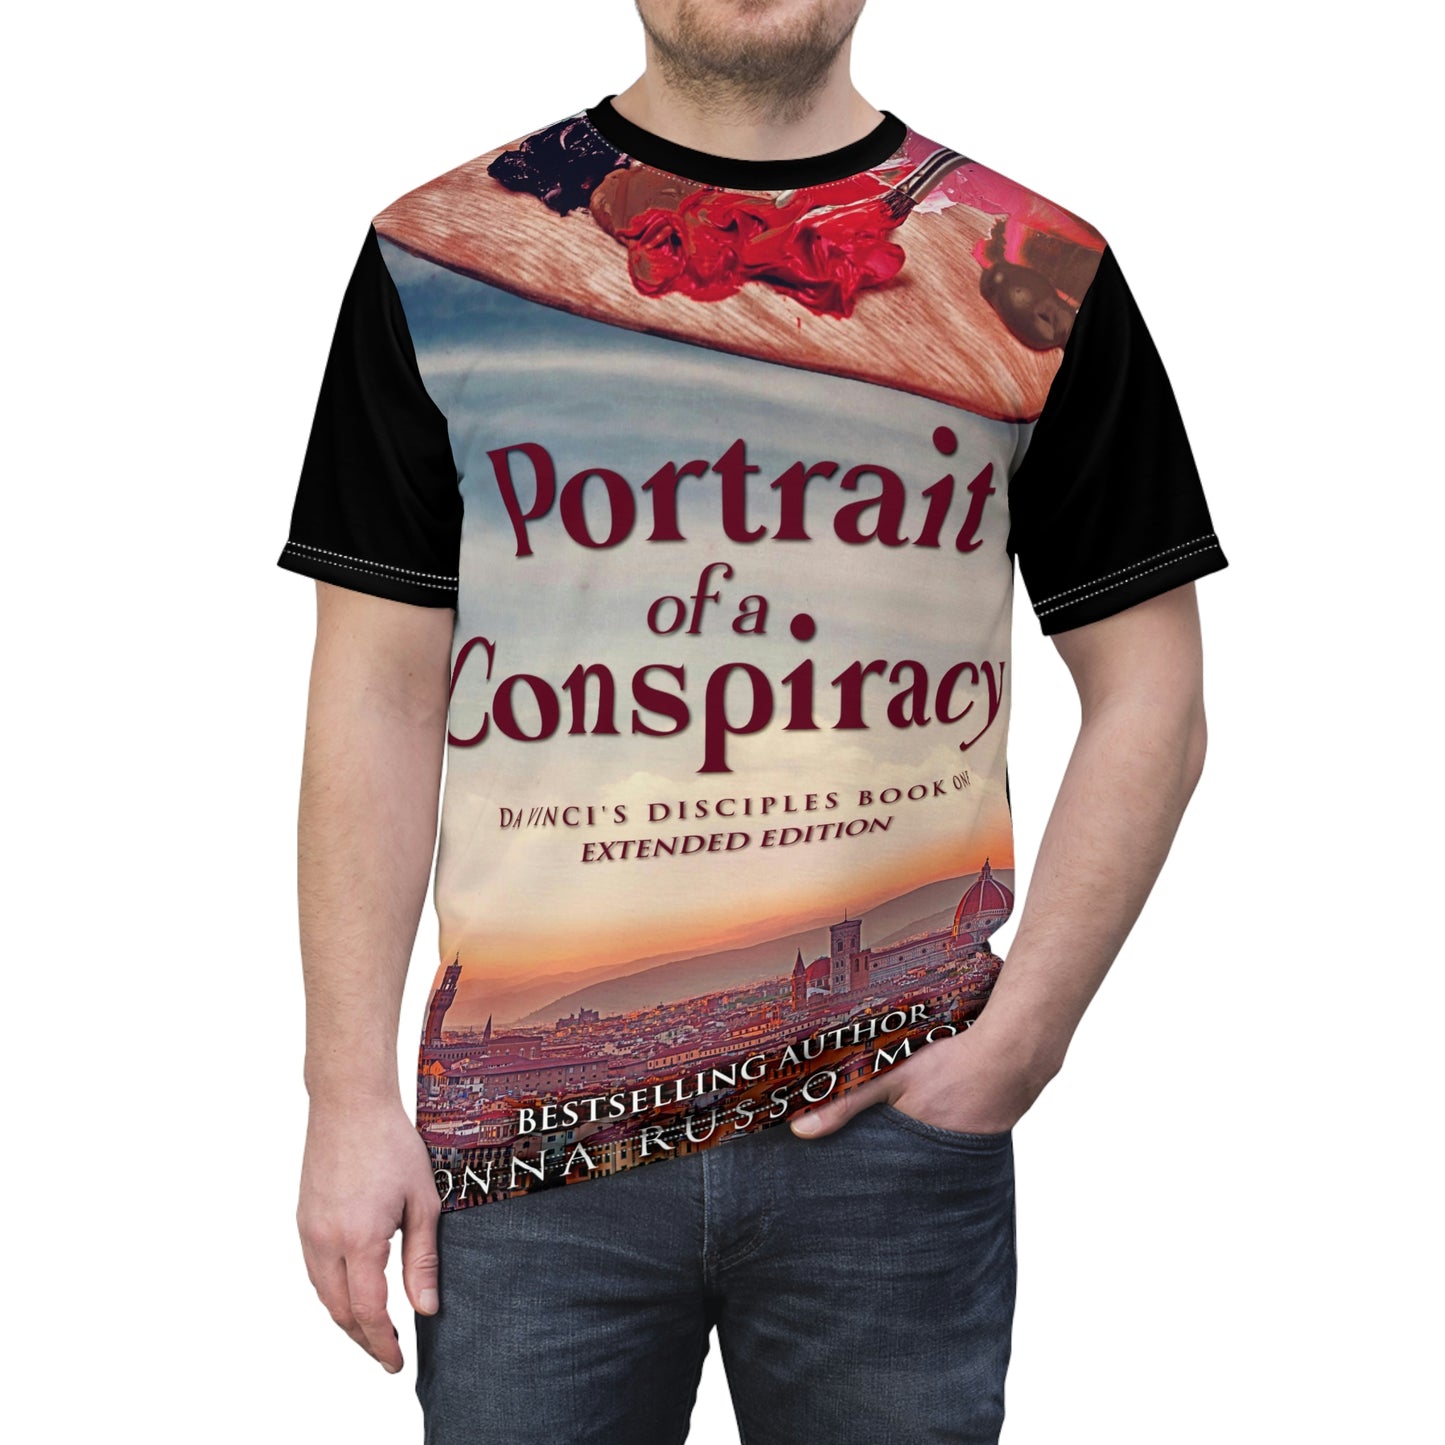 Portrait Of A Conspiracy - Unisex All-Over Print Cut & Sew T-Shirt